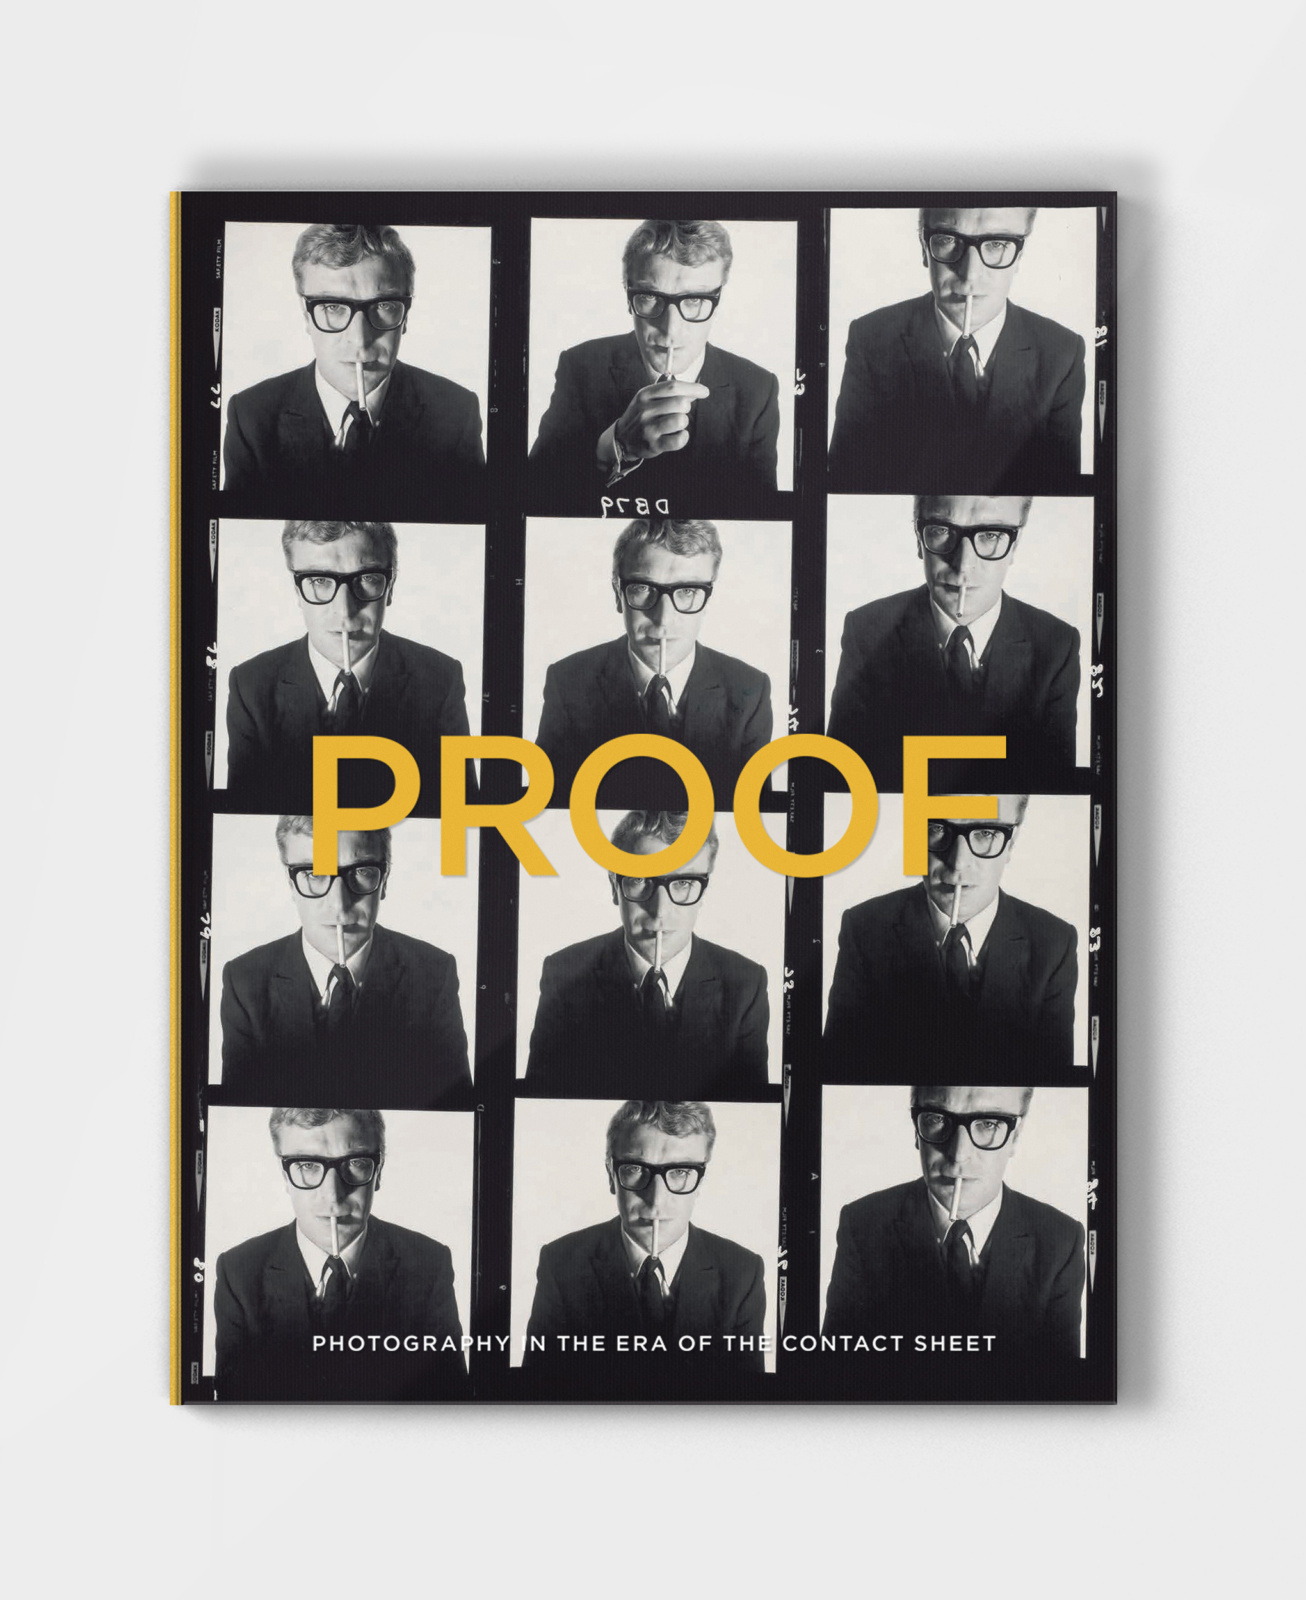 Book design cover showing "PROOF" in yellow on acetate, overlaying Micheal Caine contact sheet